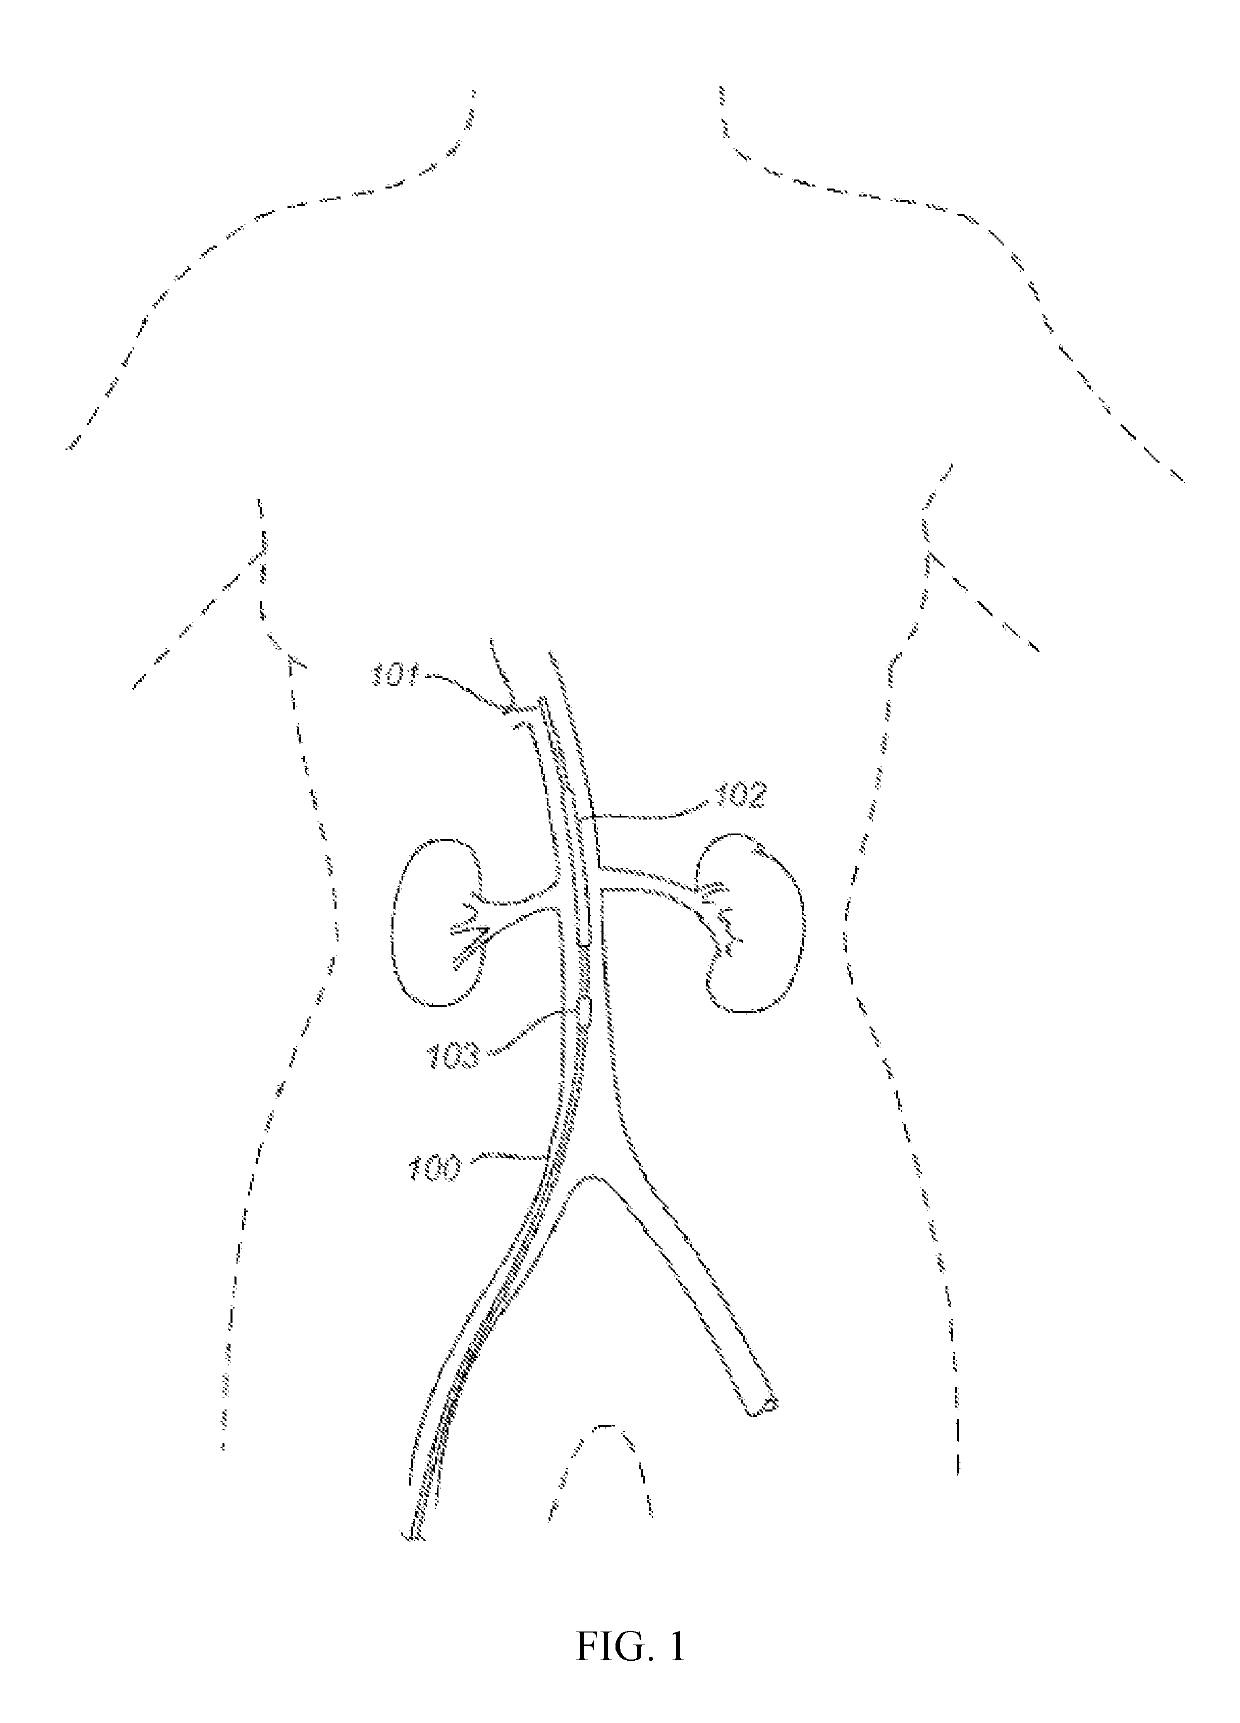 Devices and methods for treating acute kidney injury